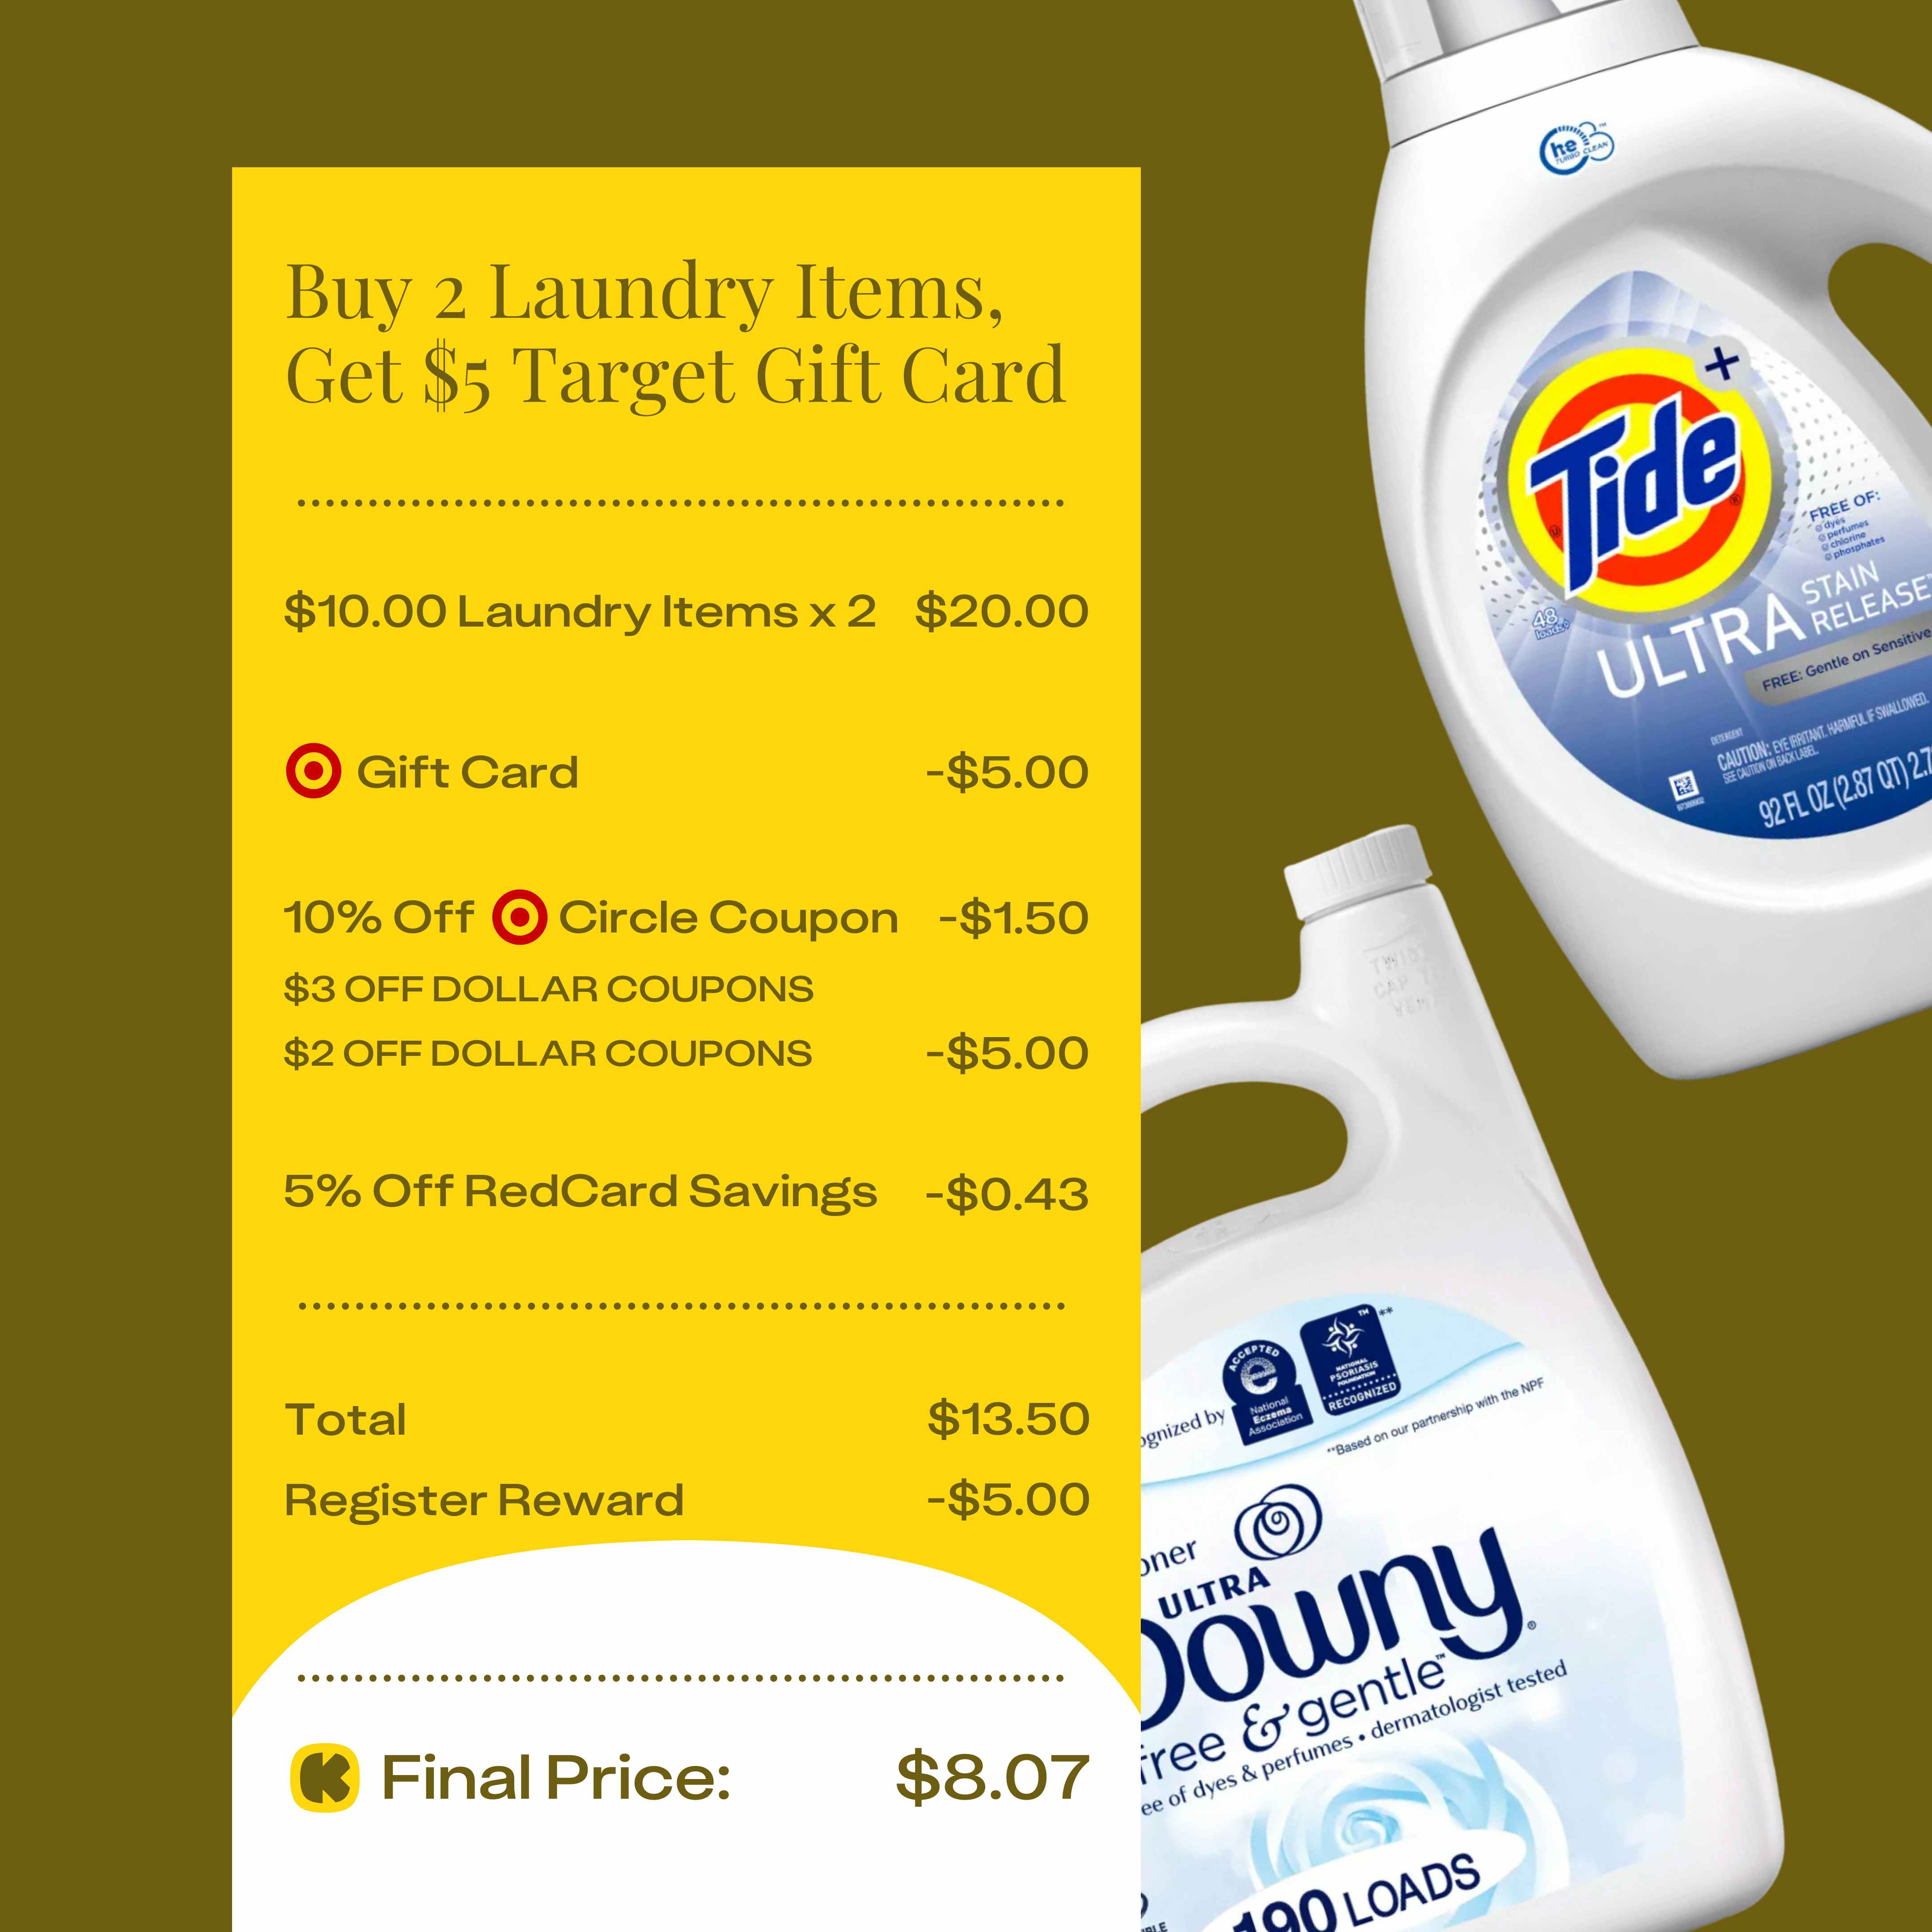 a calculation of discounts using Target circle offers and gift card promotion, manufacturer coupons, and redcard